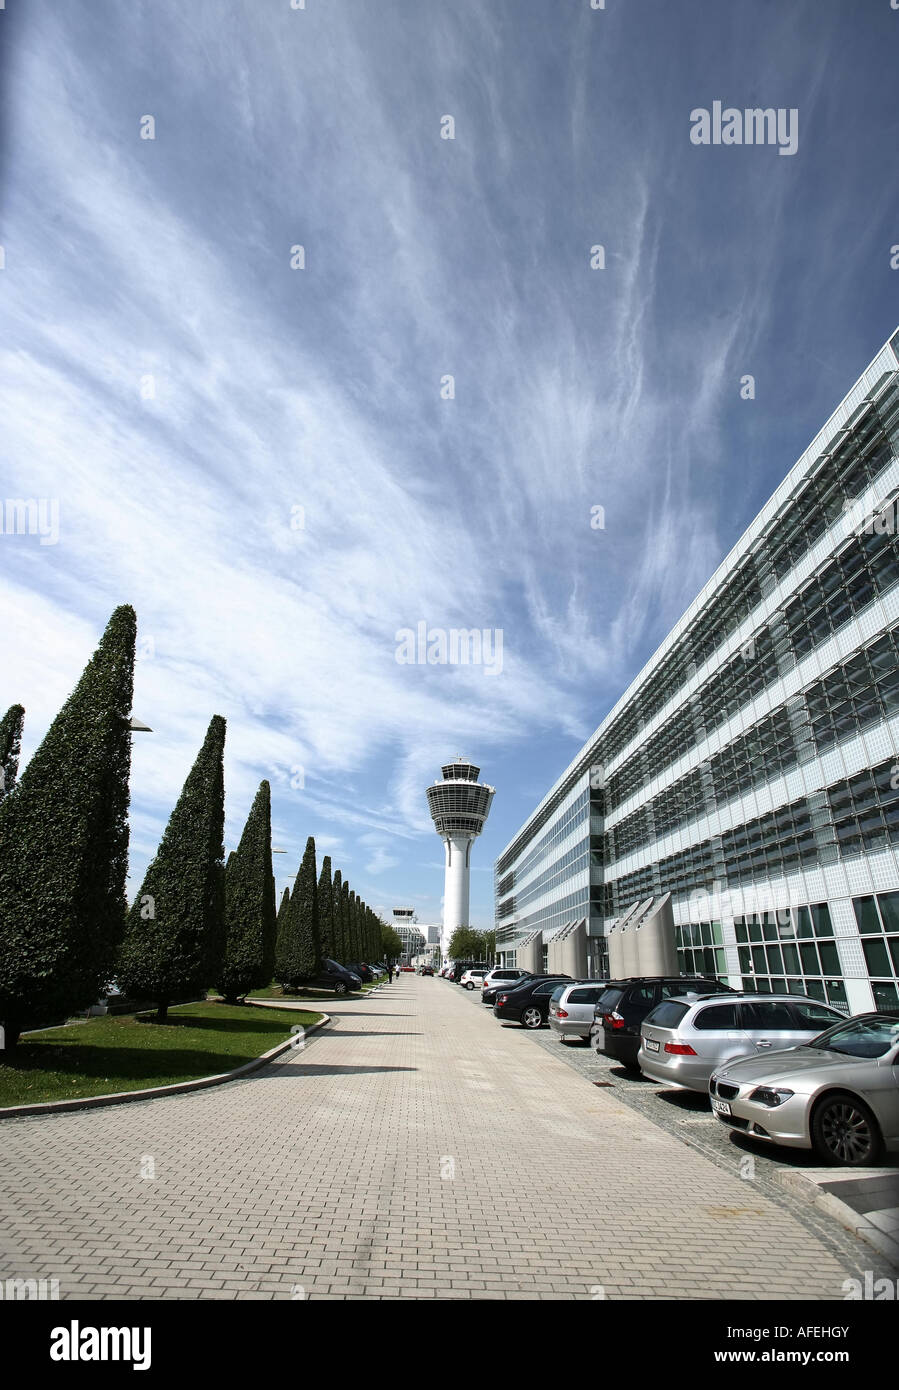 Illustration Airport: Munich Airport exterior view with tower, trees and office buildings Stock Photo